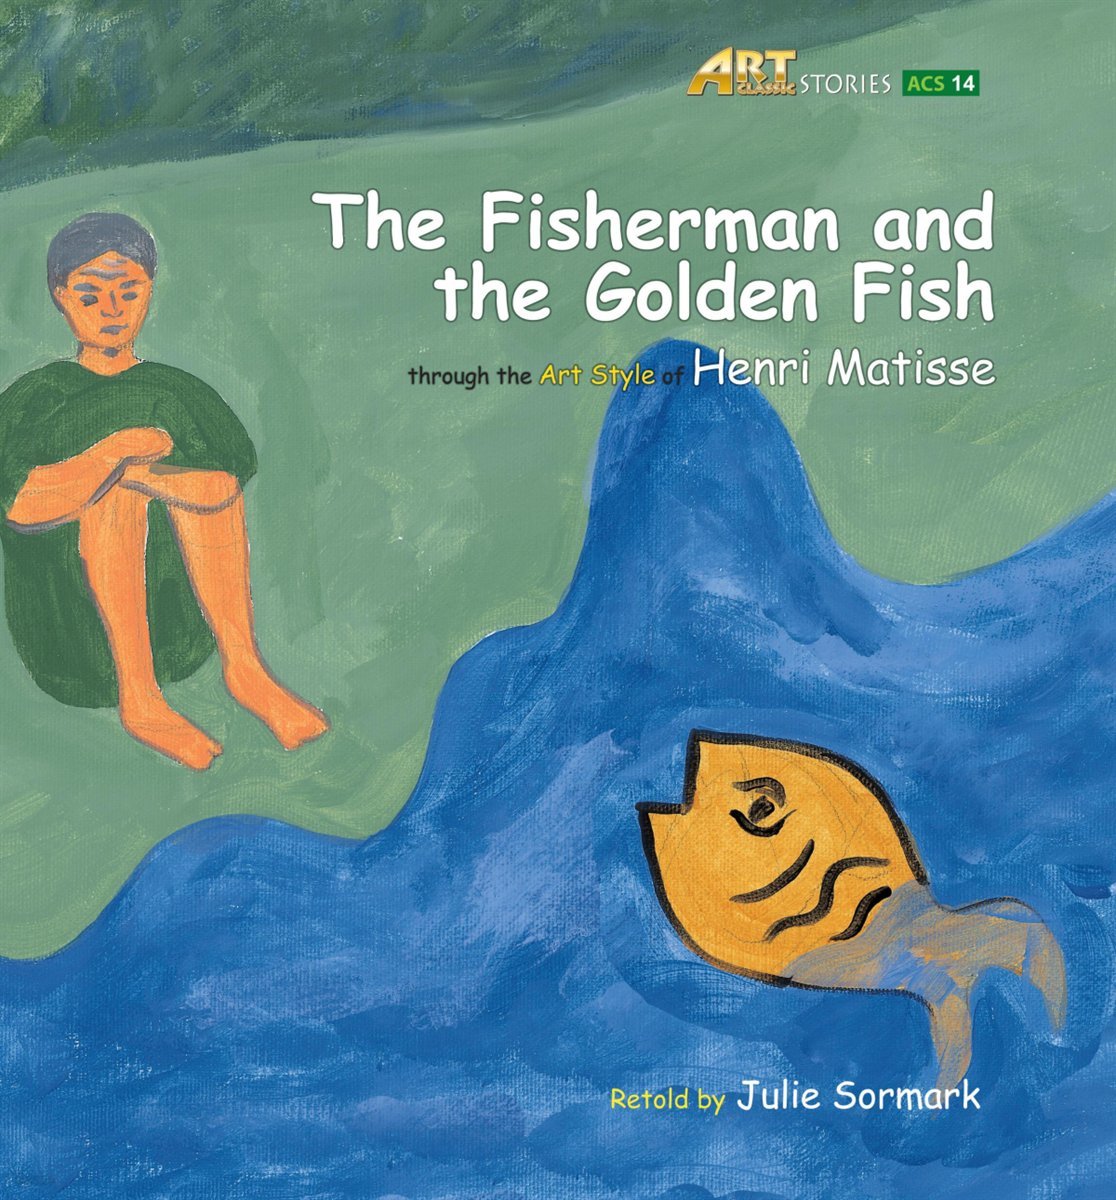 The Fisherman and the Golden Fish